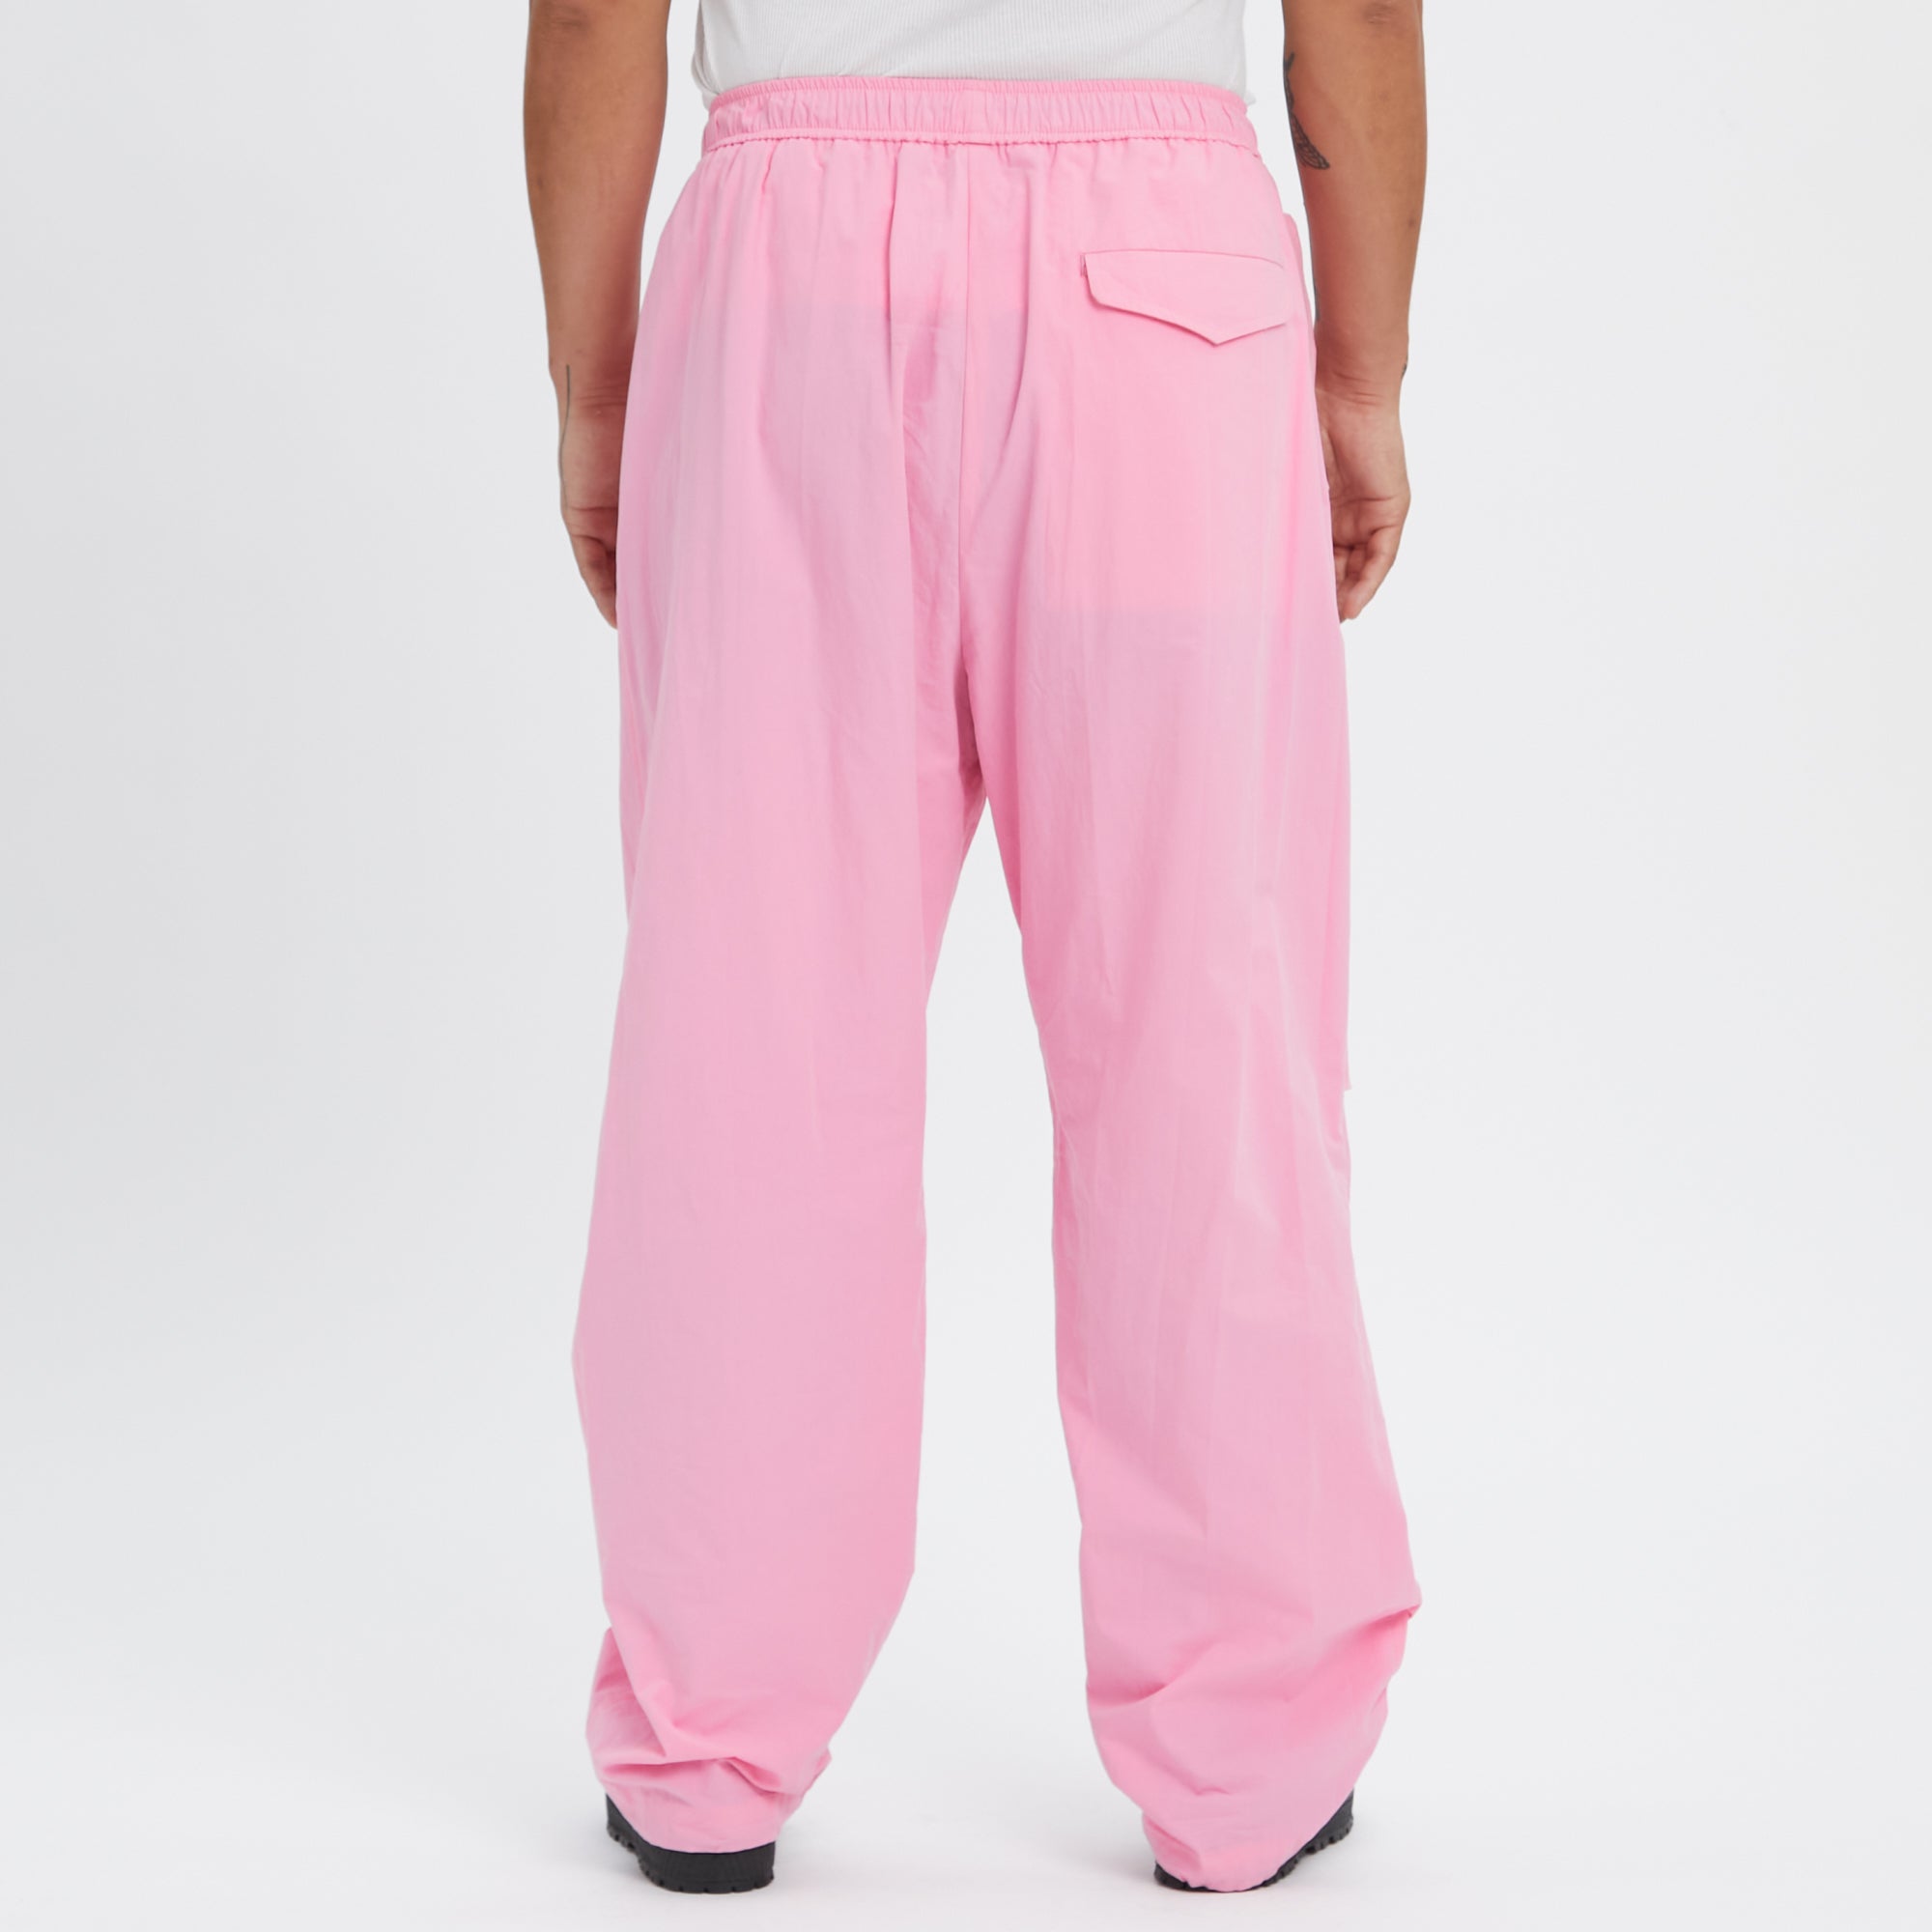 M100 Pant - Pink Cotton – s.k. manor hill